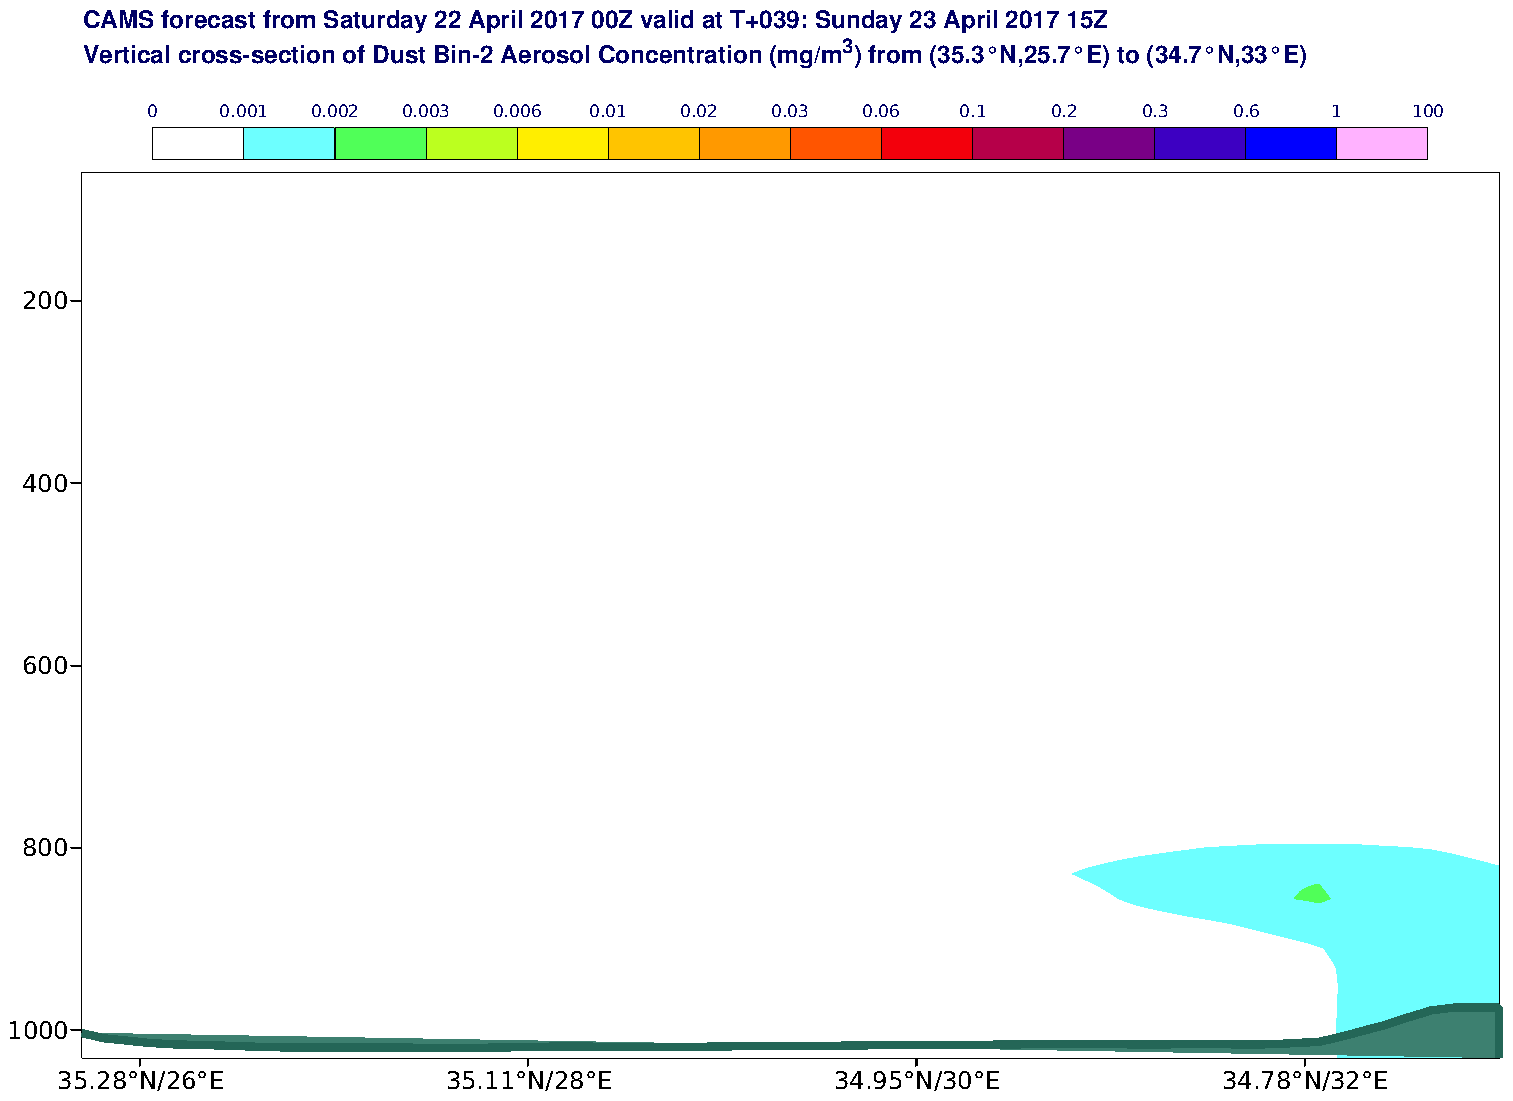 Vertical cross-section of Dust Bin-2 Aerosol Concentration (mg/m3) valid at T39 - 2017-04-23 15:00